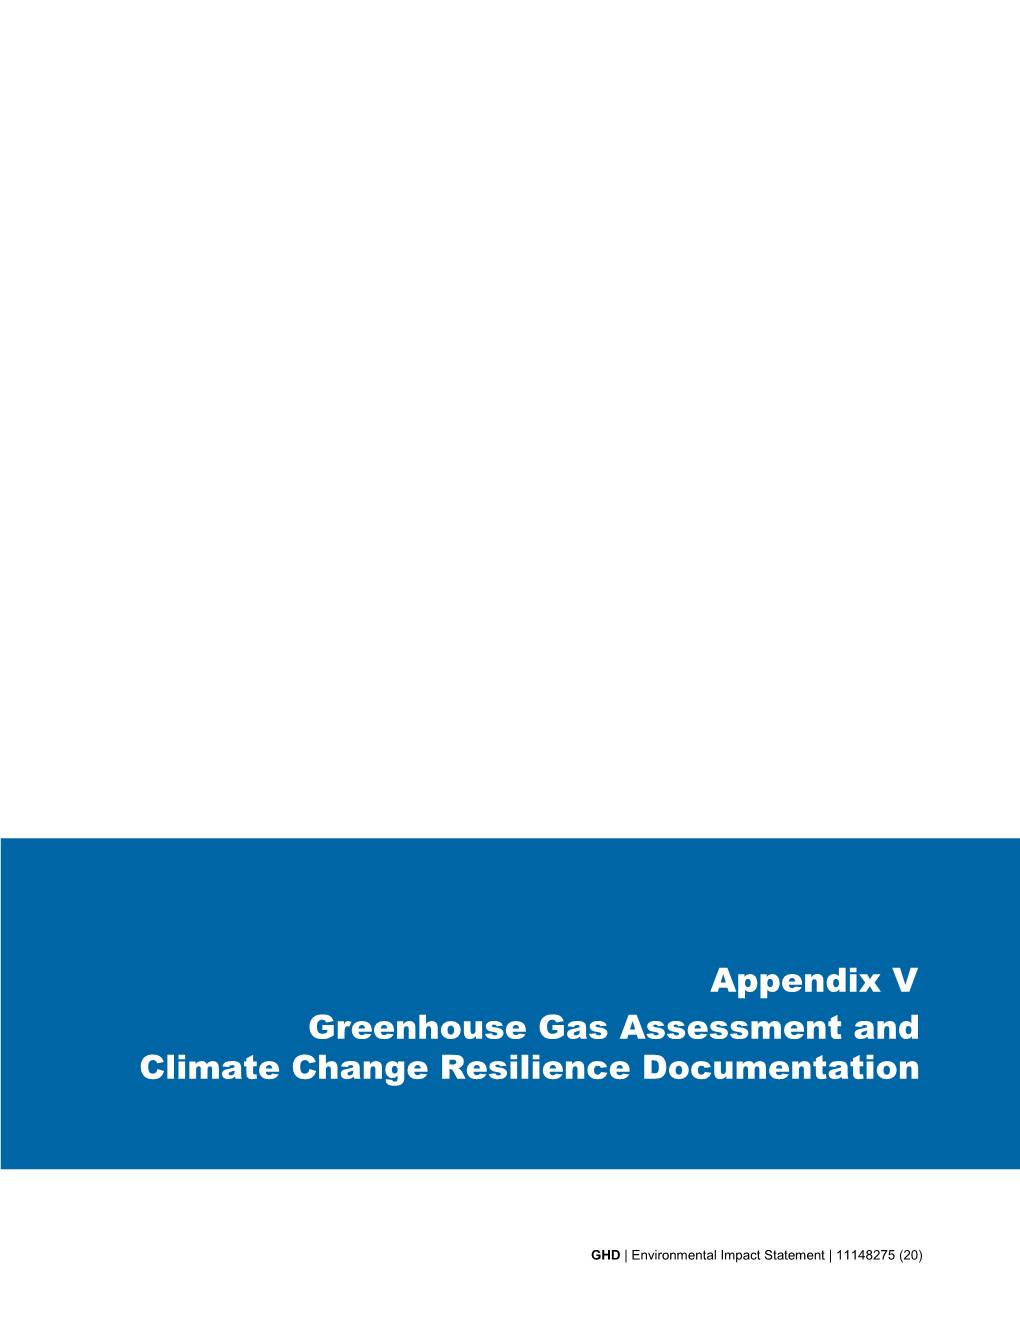 Appendix V Greenhouse Gas Assessment and Climate Change Resilience Documentation